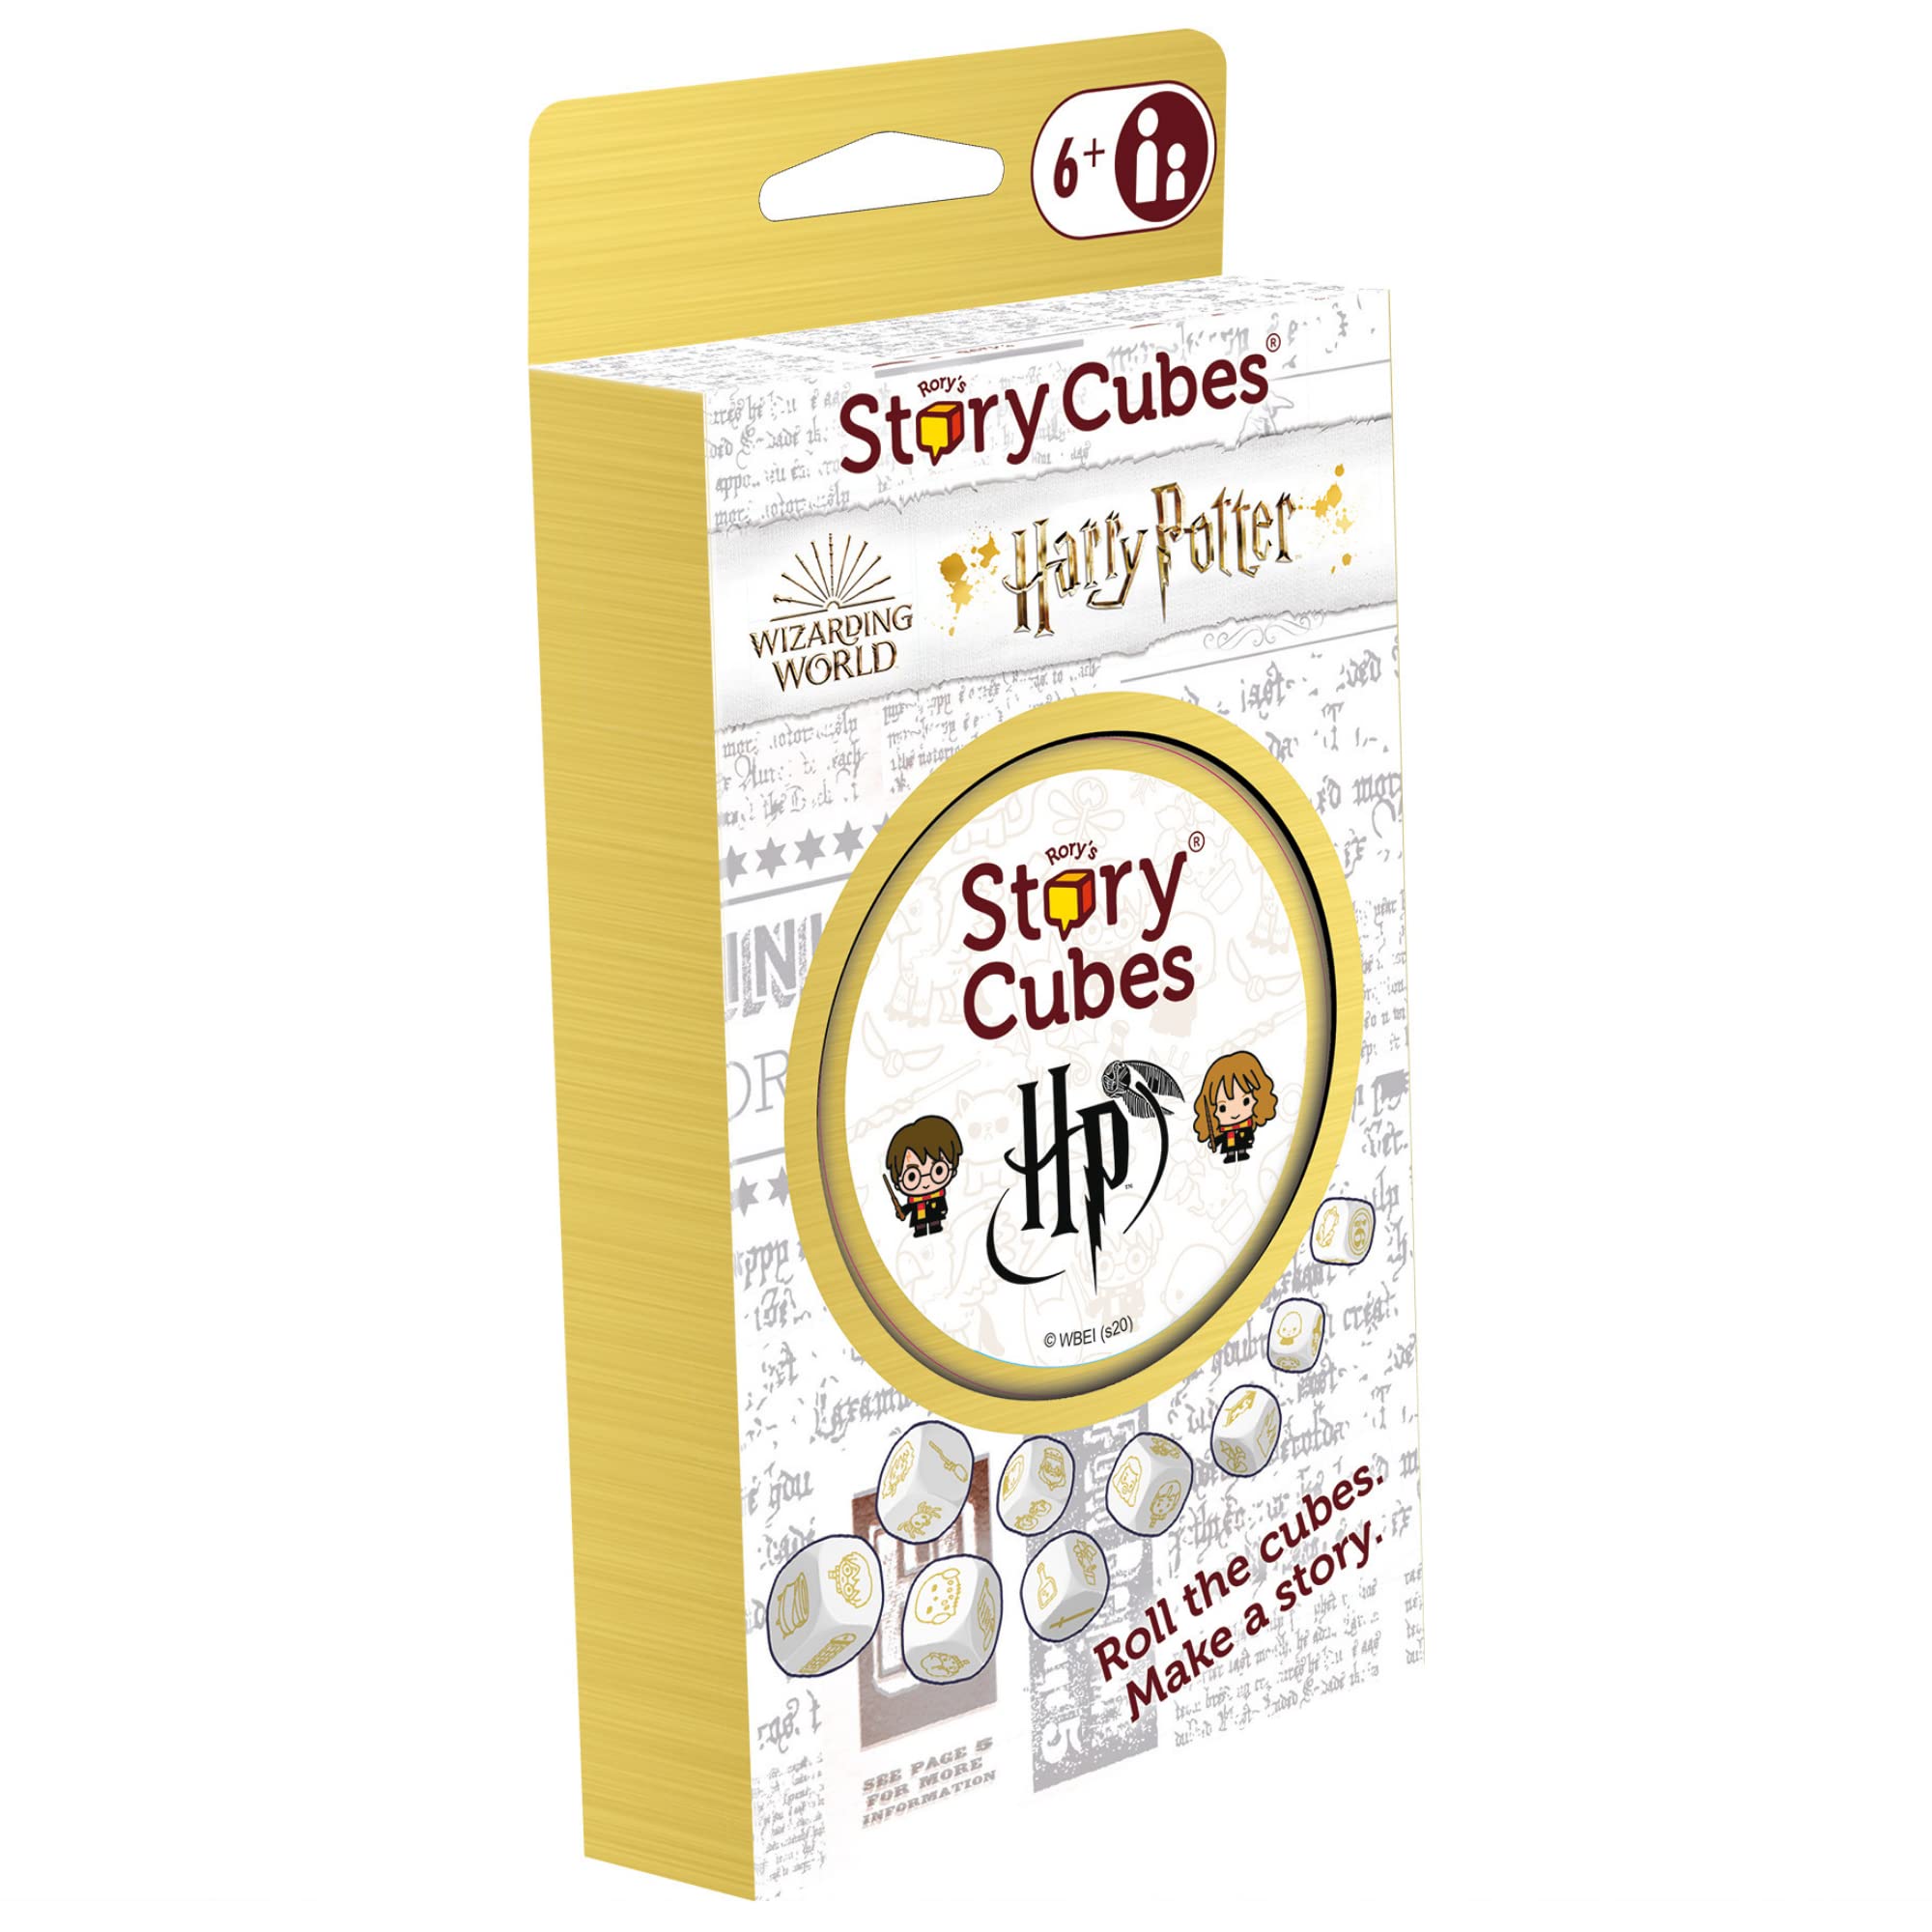 Zygomatic Rory's Story Cubes Harry Potter Edition | Storytelling Game for Kids and Adults | Fun Family Game | Creative Kids Game | Ages 6 and up | 1+ Players | Average Playtime 10 Minutes | Made